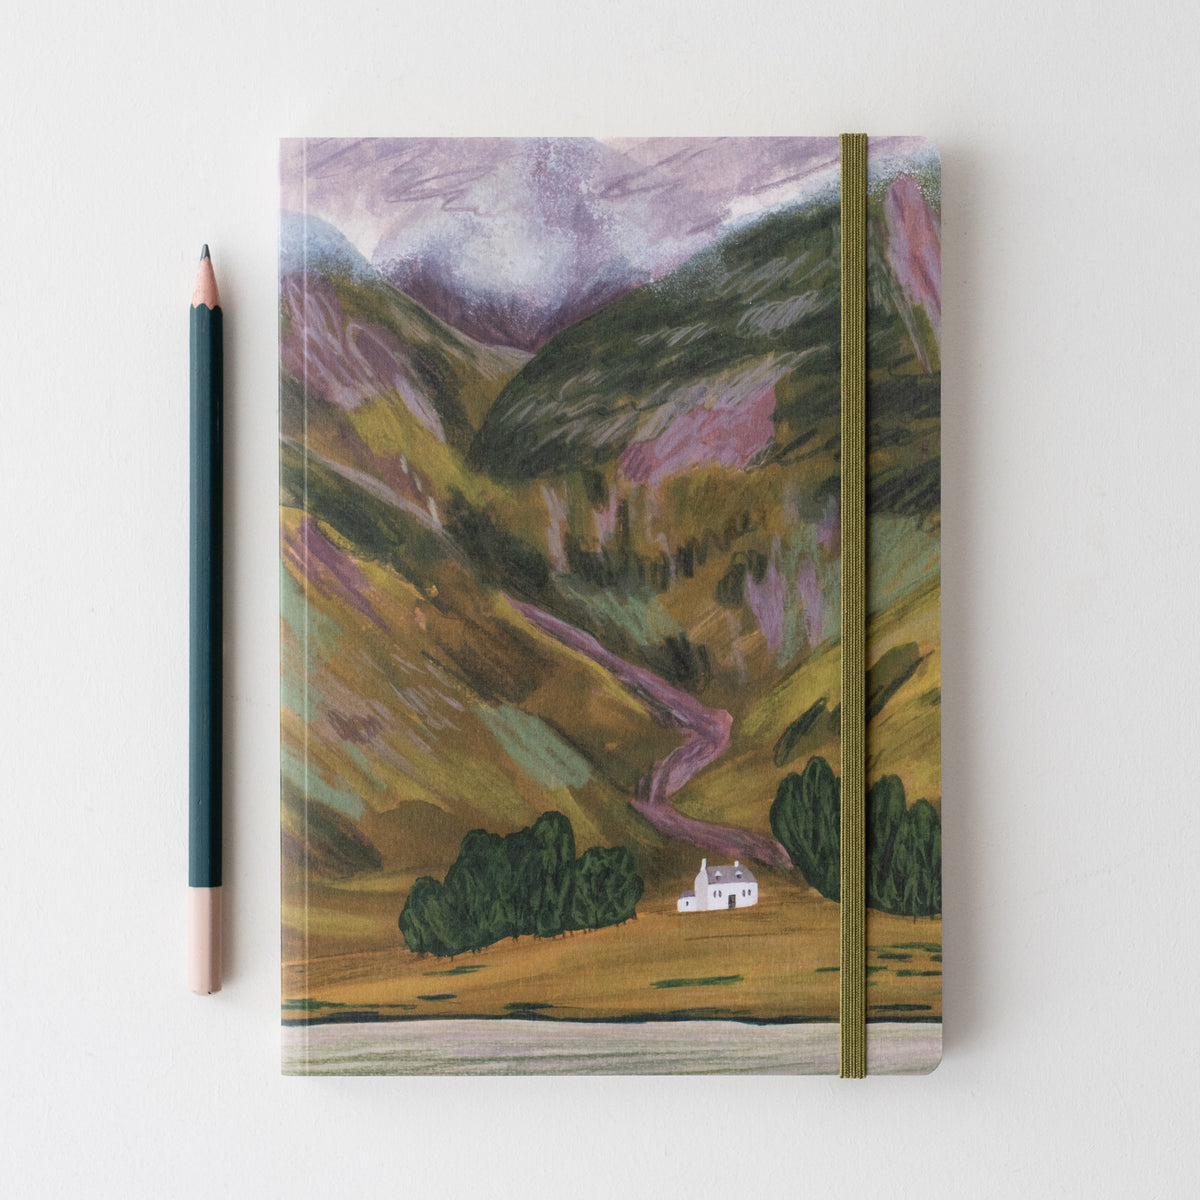 Glencoe In Late Summer A5 Scottish Ruled Notebook by penny black